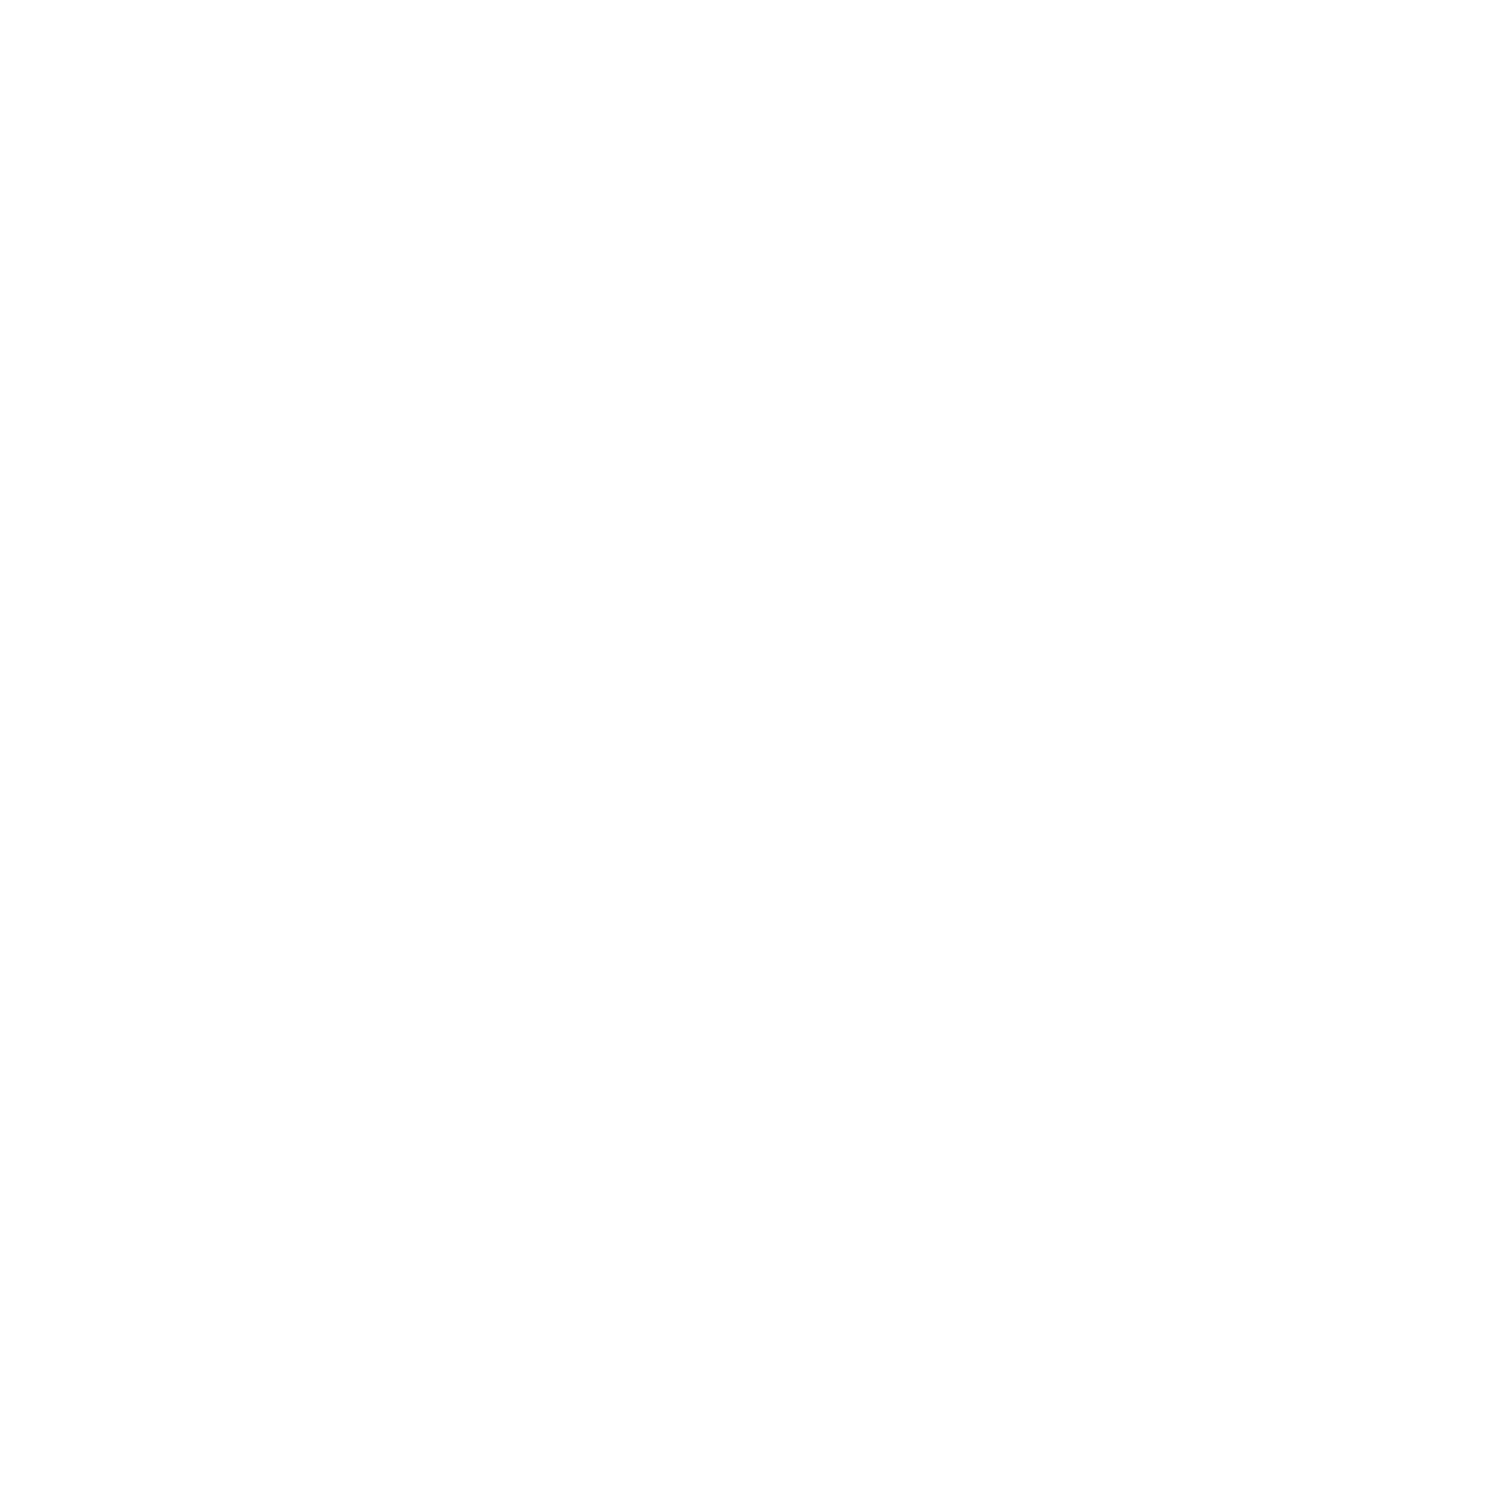 Timber Biscuit Woodworks